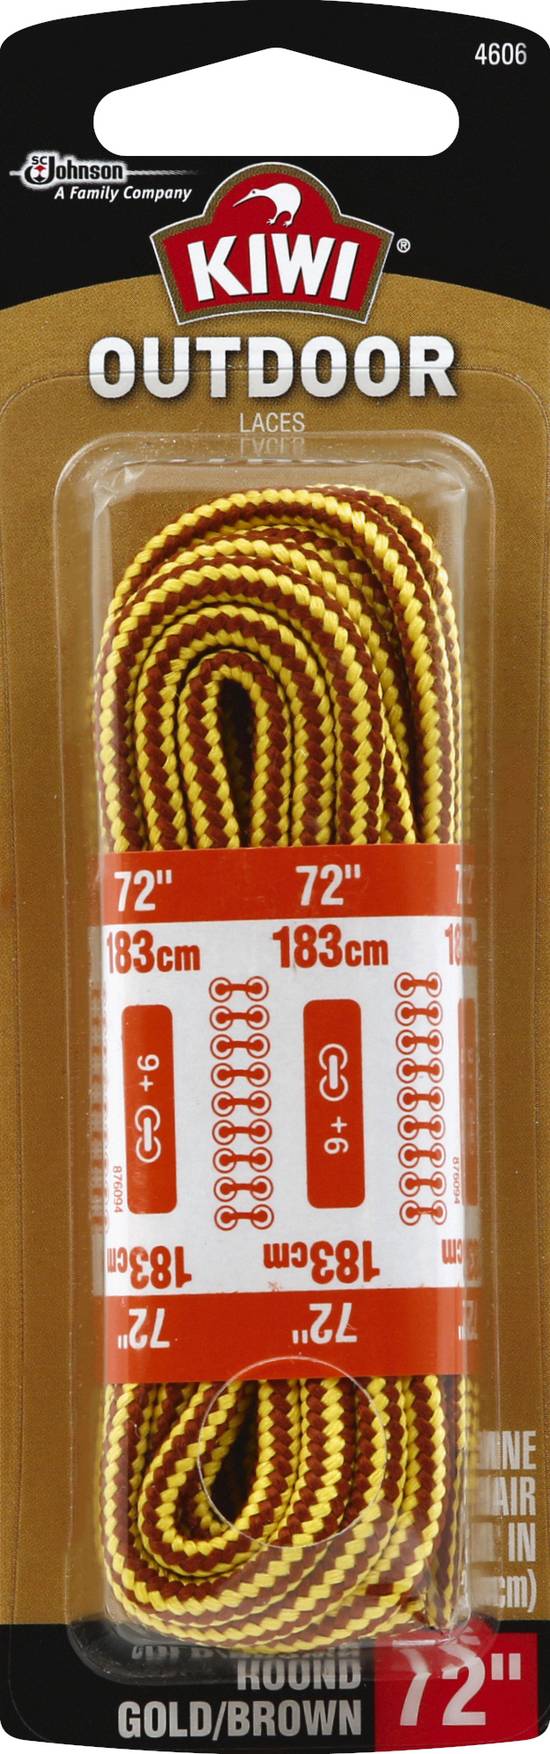 Kiwi Gold/Brown Outdoor Laces